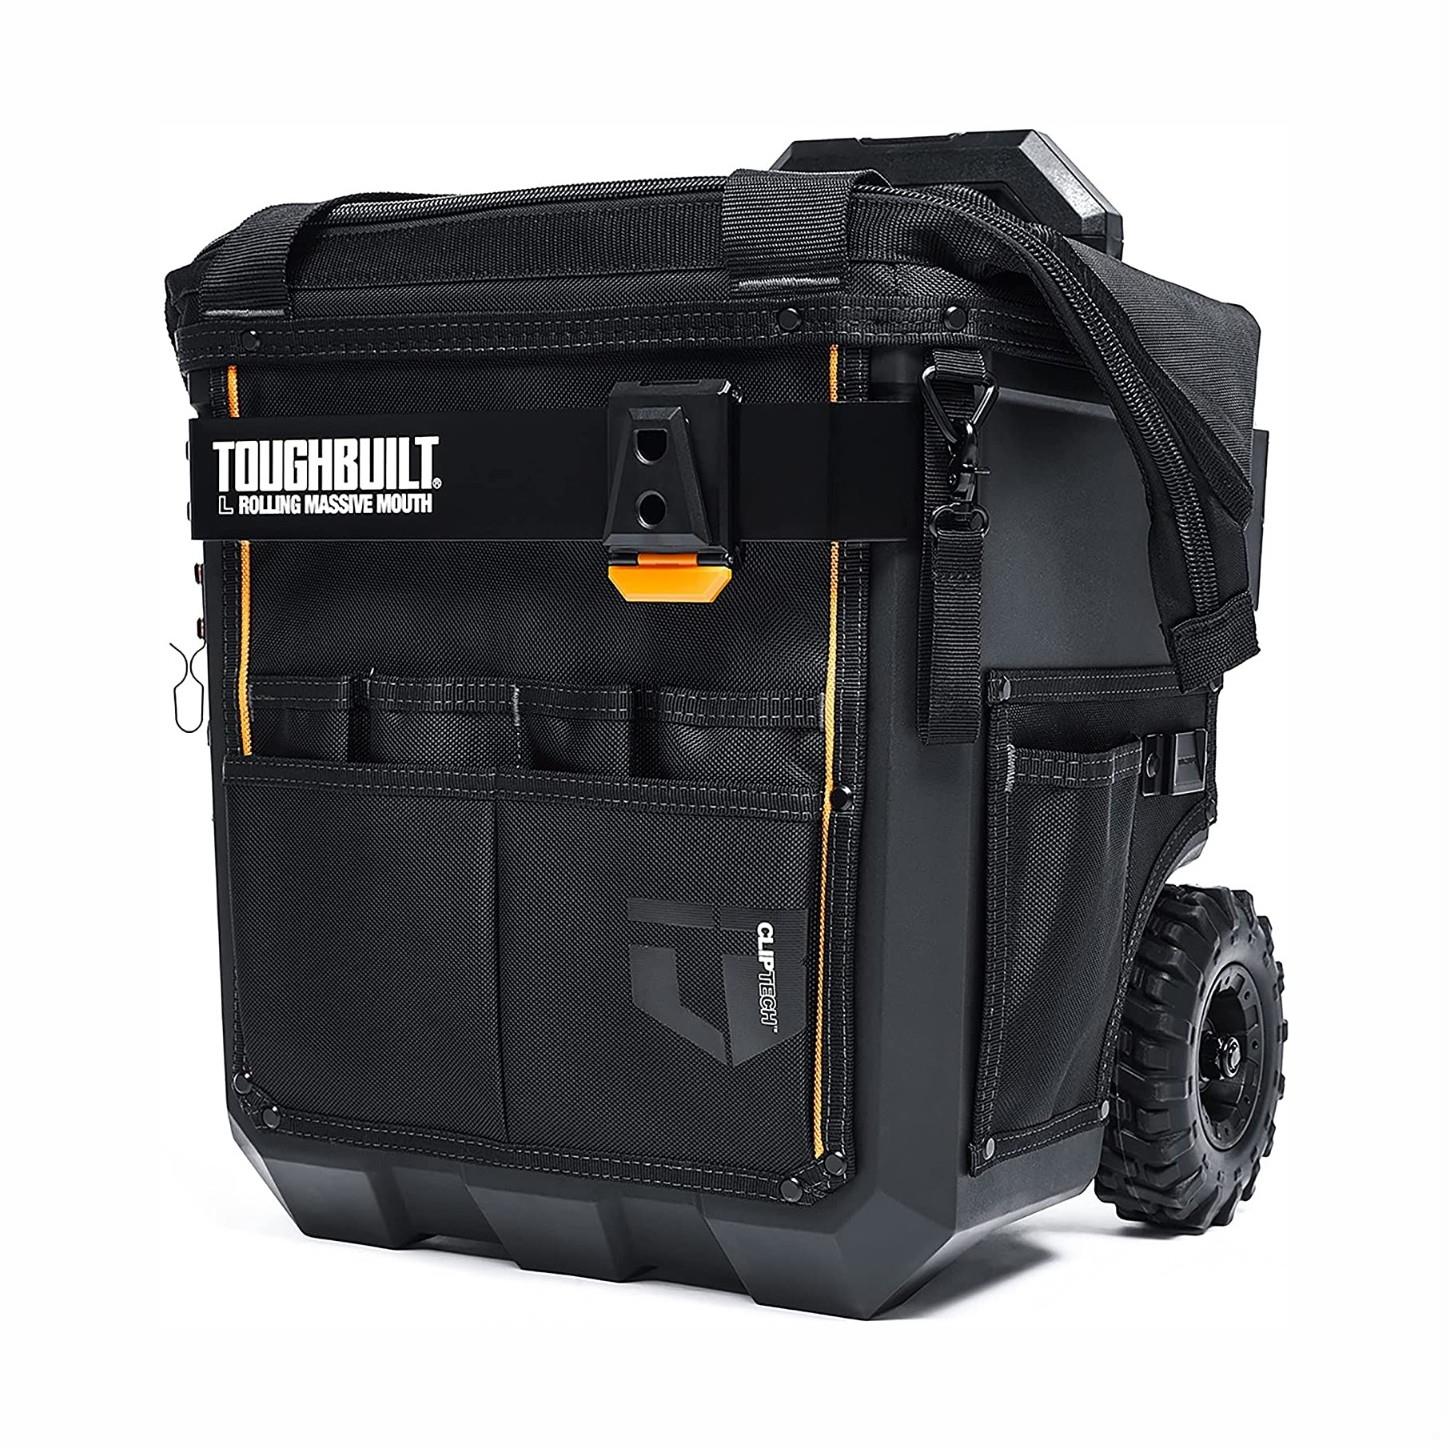 Toughbuilt TB-CT-61-14 Large Rolling Hard Body Massive Mouth Too Bag; 350mm (14